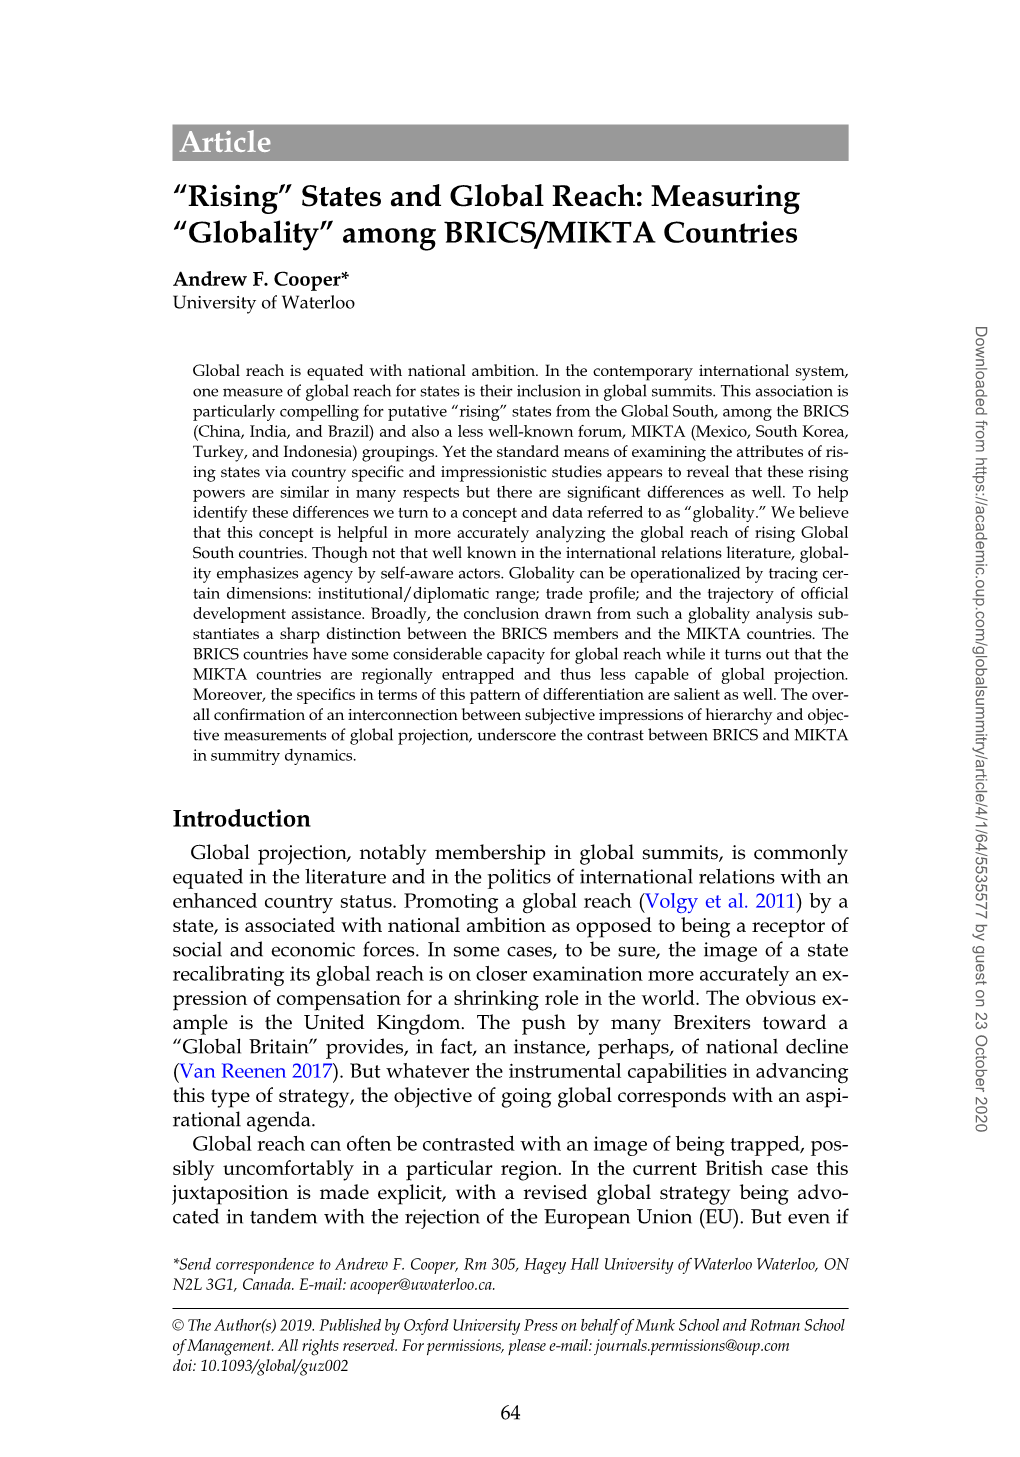 “Rising” States and Global Reach: Measuring “Globality” Among BRICS/MIKTA Countries Andrew F